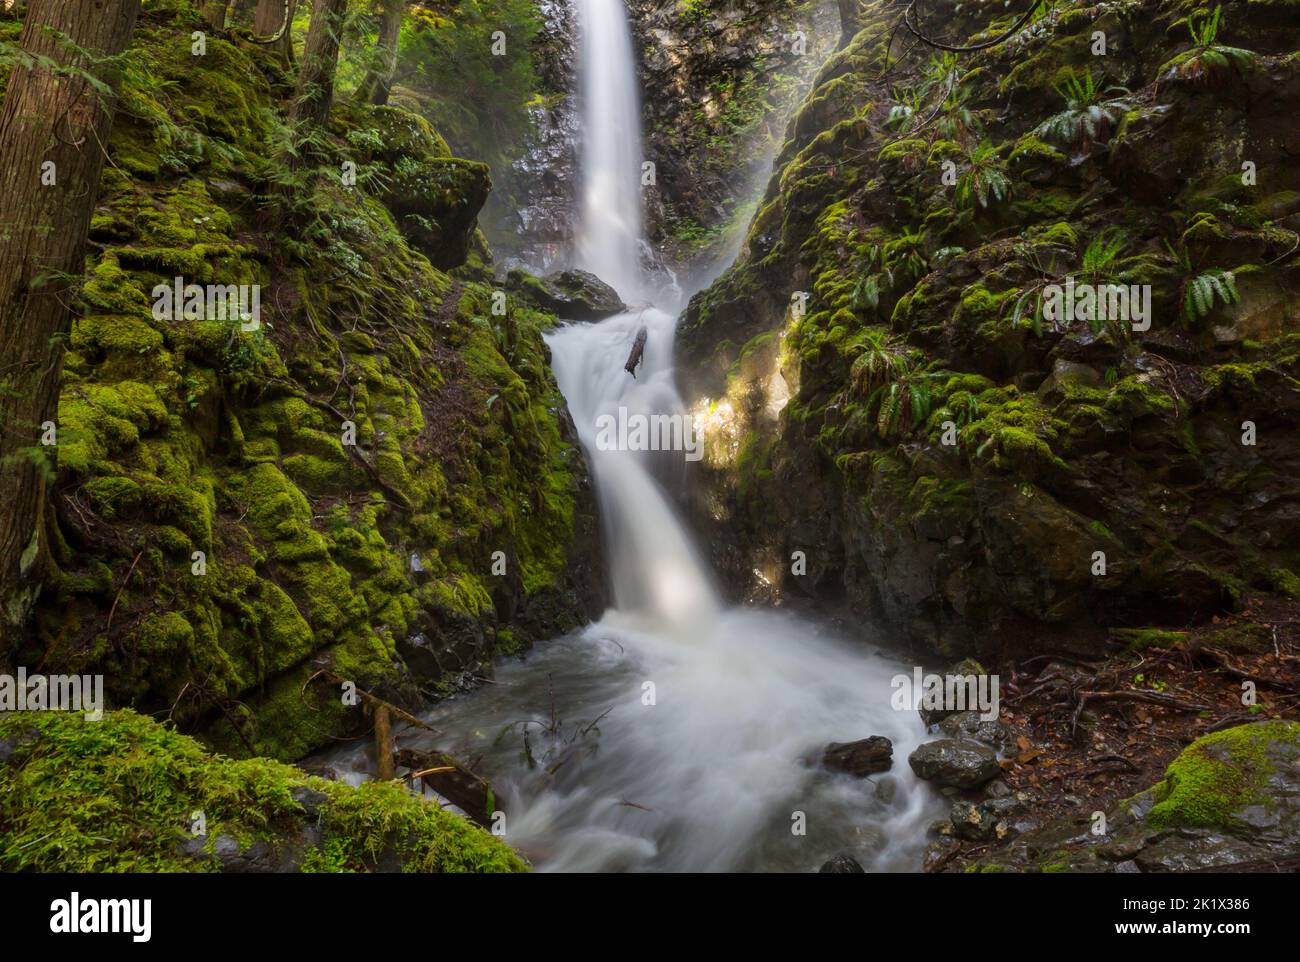 Waterfall in the beautiful green forest Stock Photo